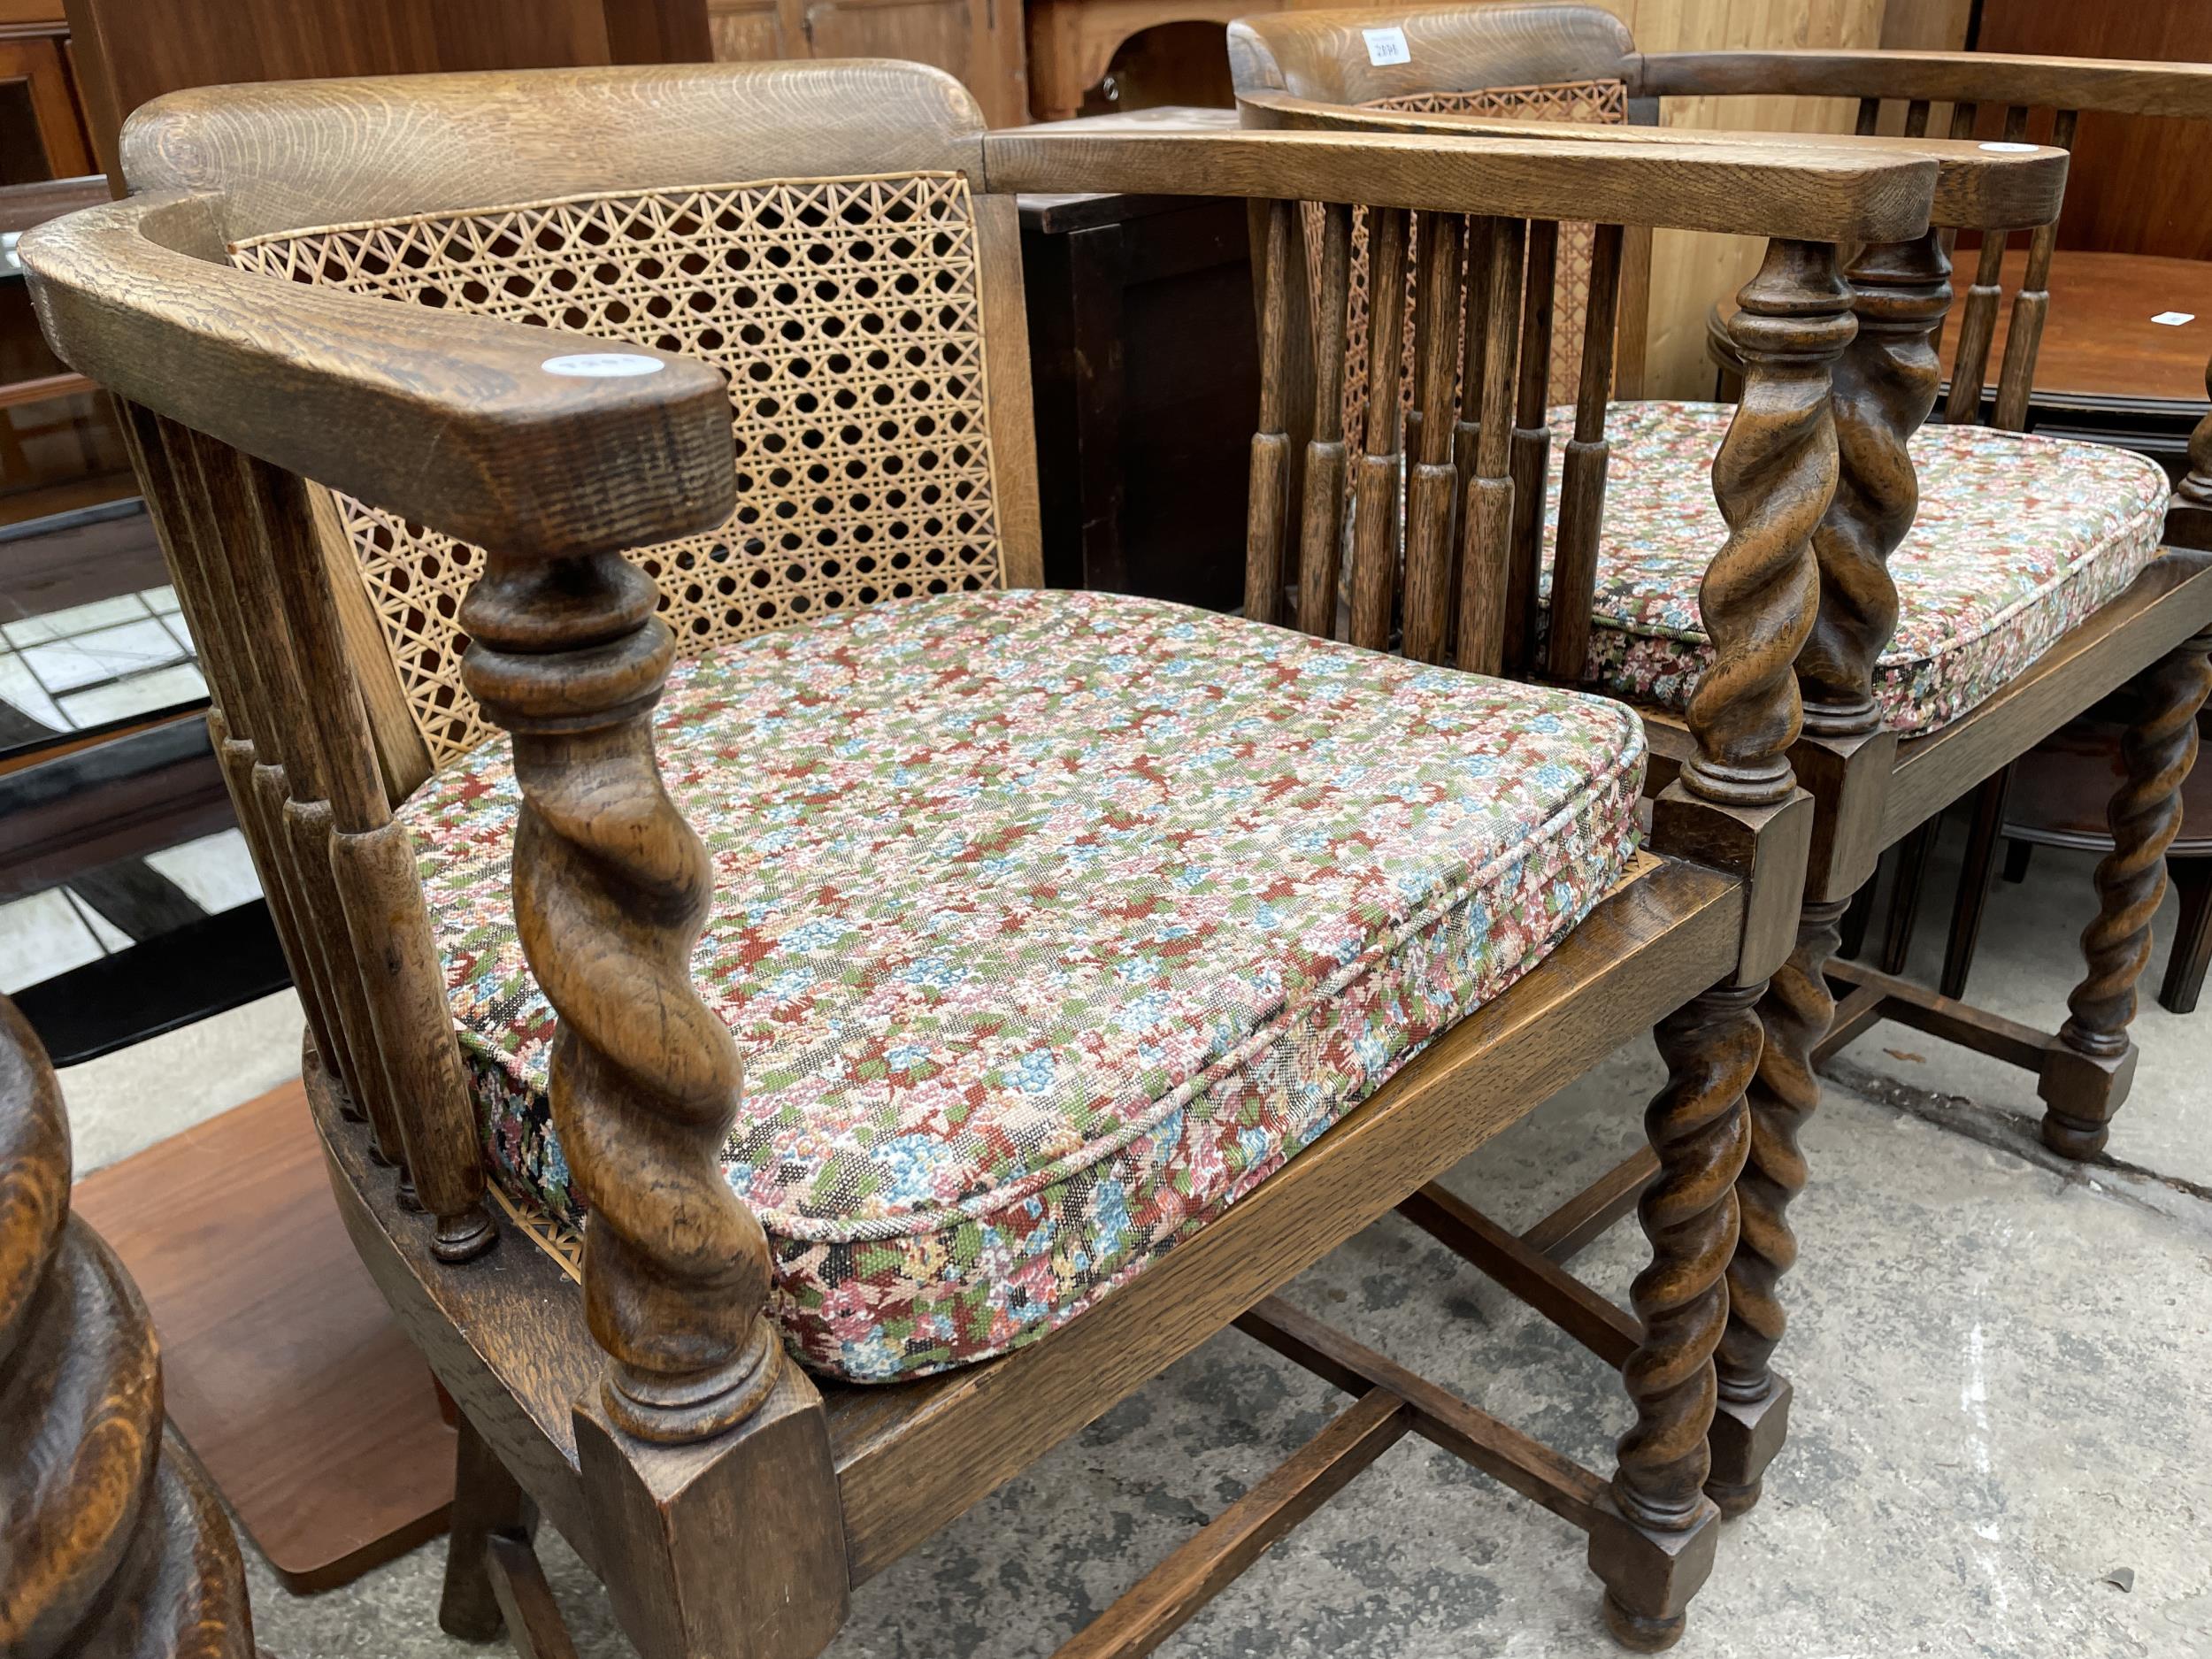 A PAIR OF EARLY 20TH CENTURY OAK TUB CHAIRS WITH CANE SEATS AND BACKS ON BARLEY TWIST LEGS AND - Image 3 of 4